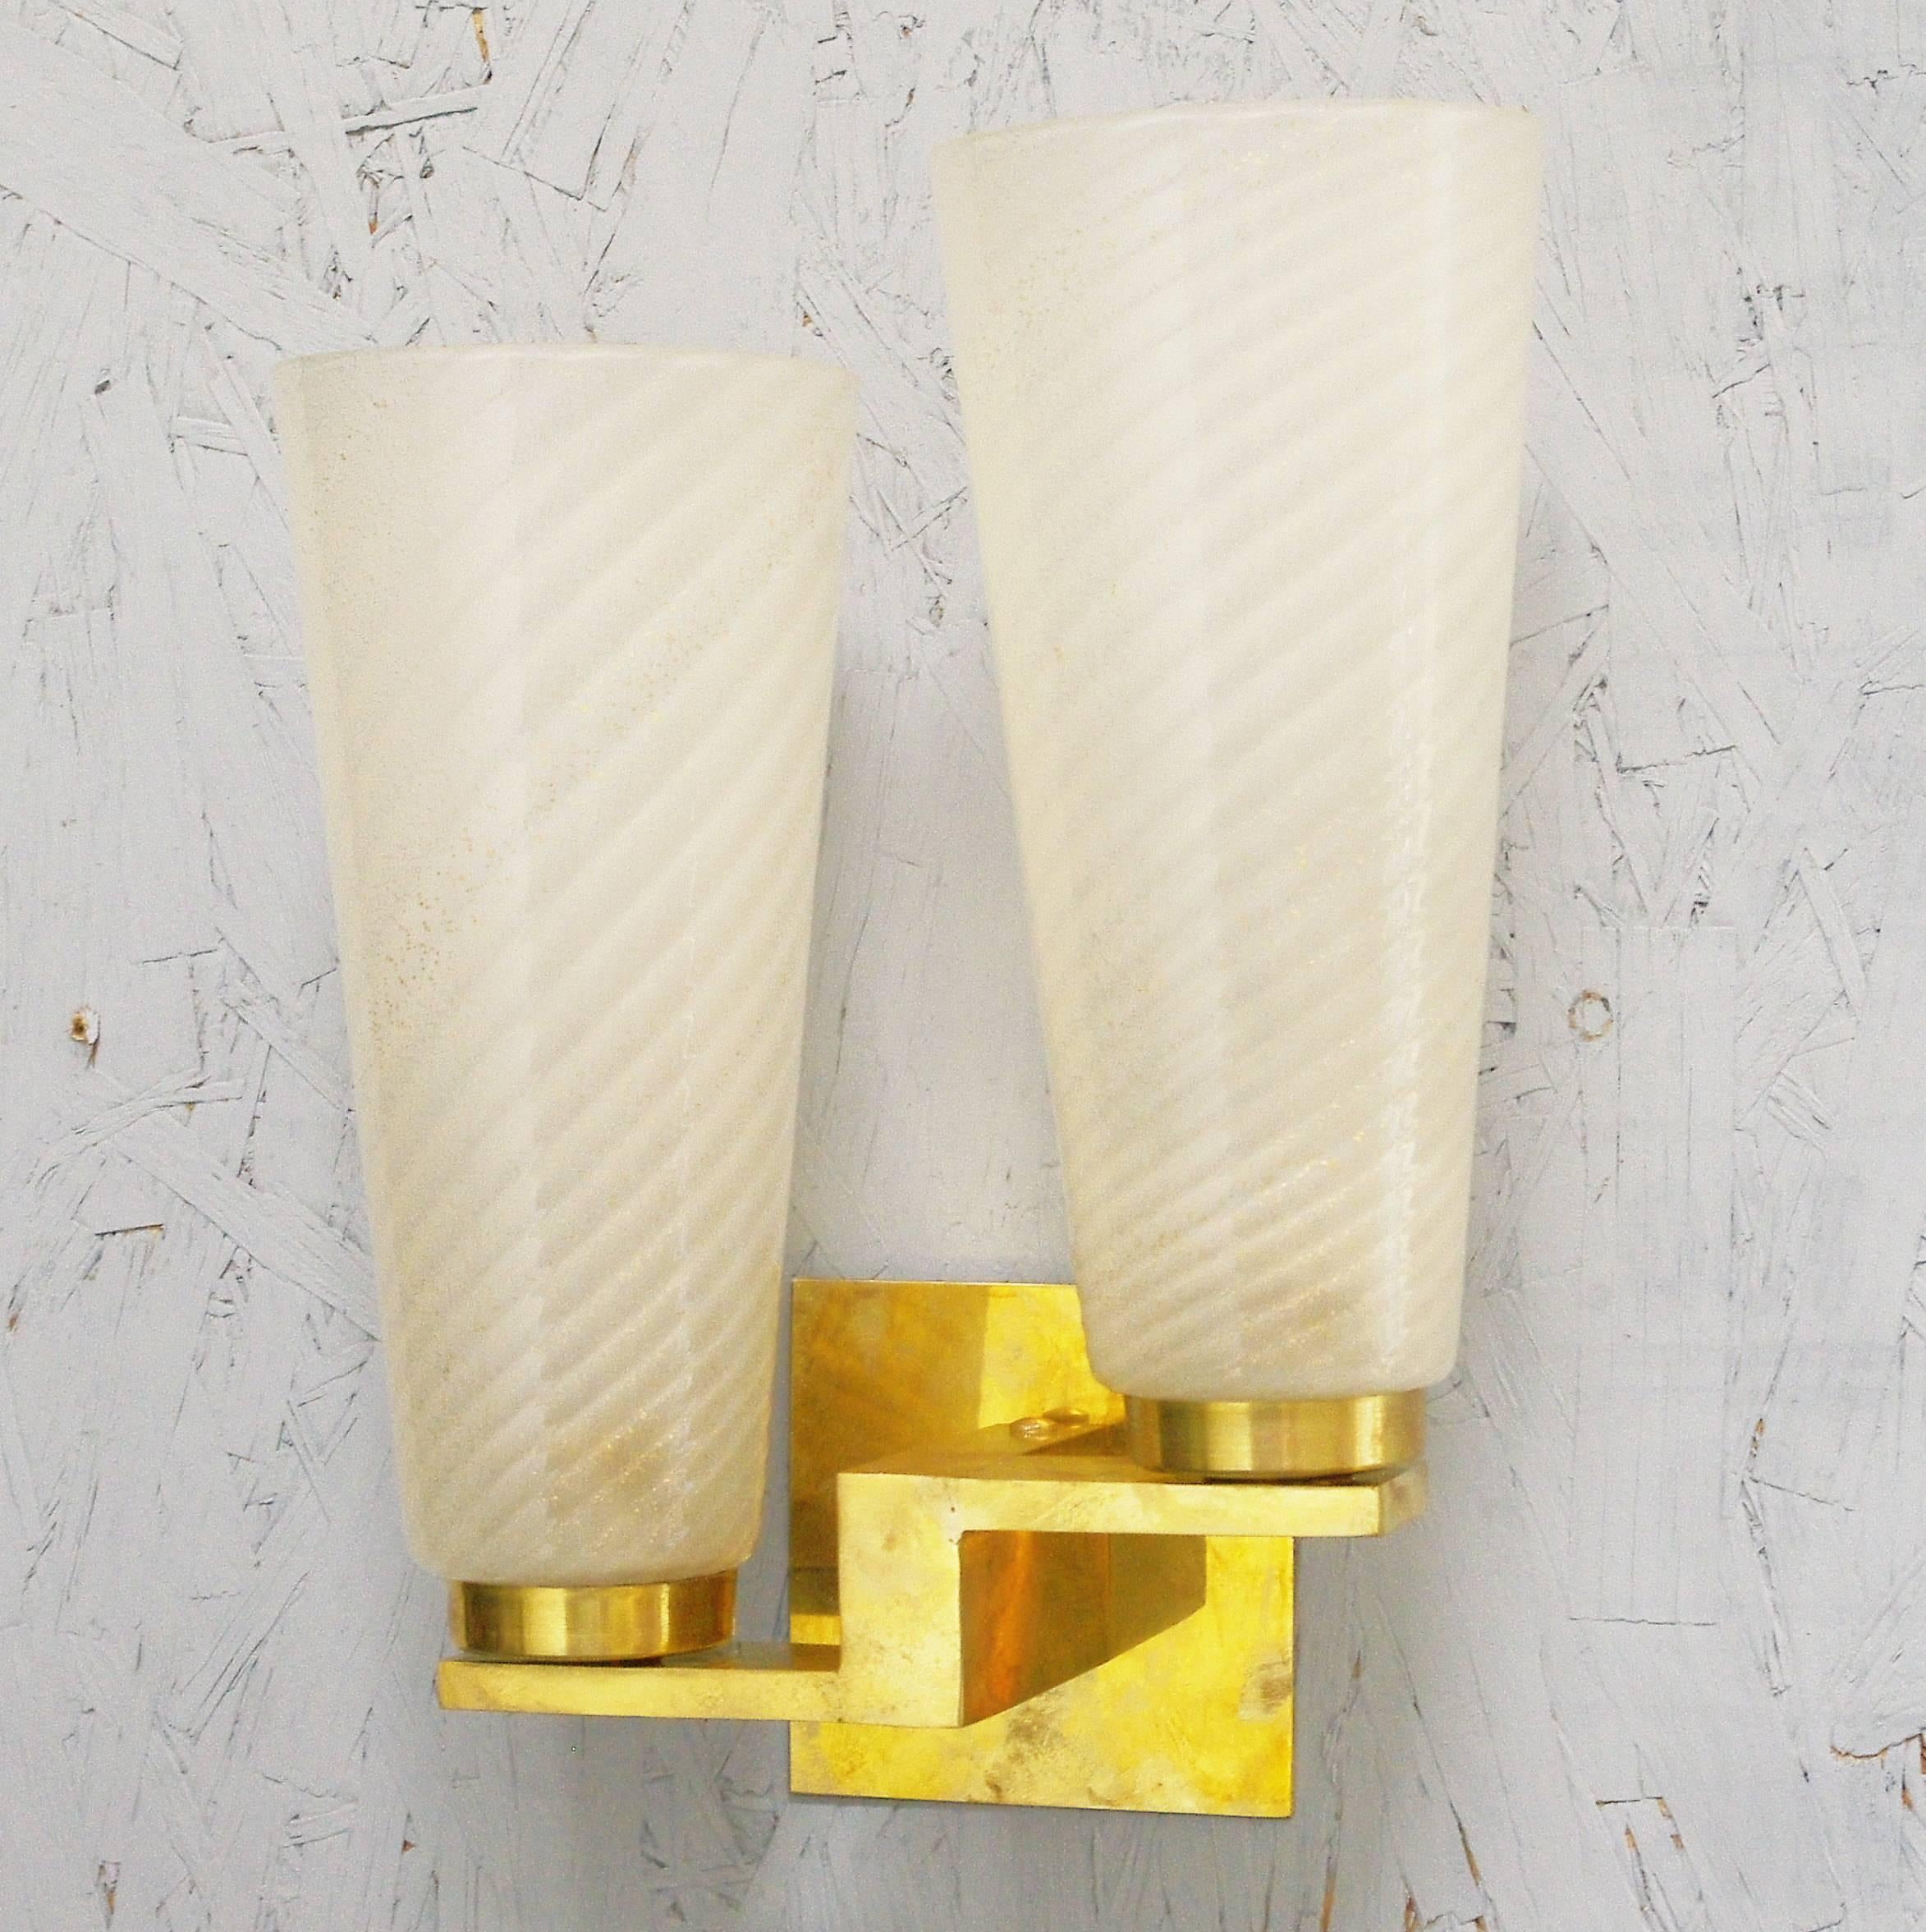 Limited edition Italian wall lights with cylinder-shaped hand blown frosted gold infused Murano glasses mounted on solid brass frames / Designed by Fabio Bergomi / Made in Italy
2 lights / E12 or E14 type / max 40W each
Height: 13 inches / Width: 10